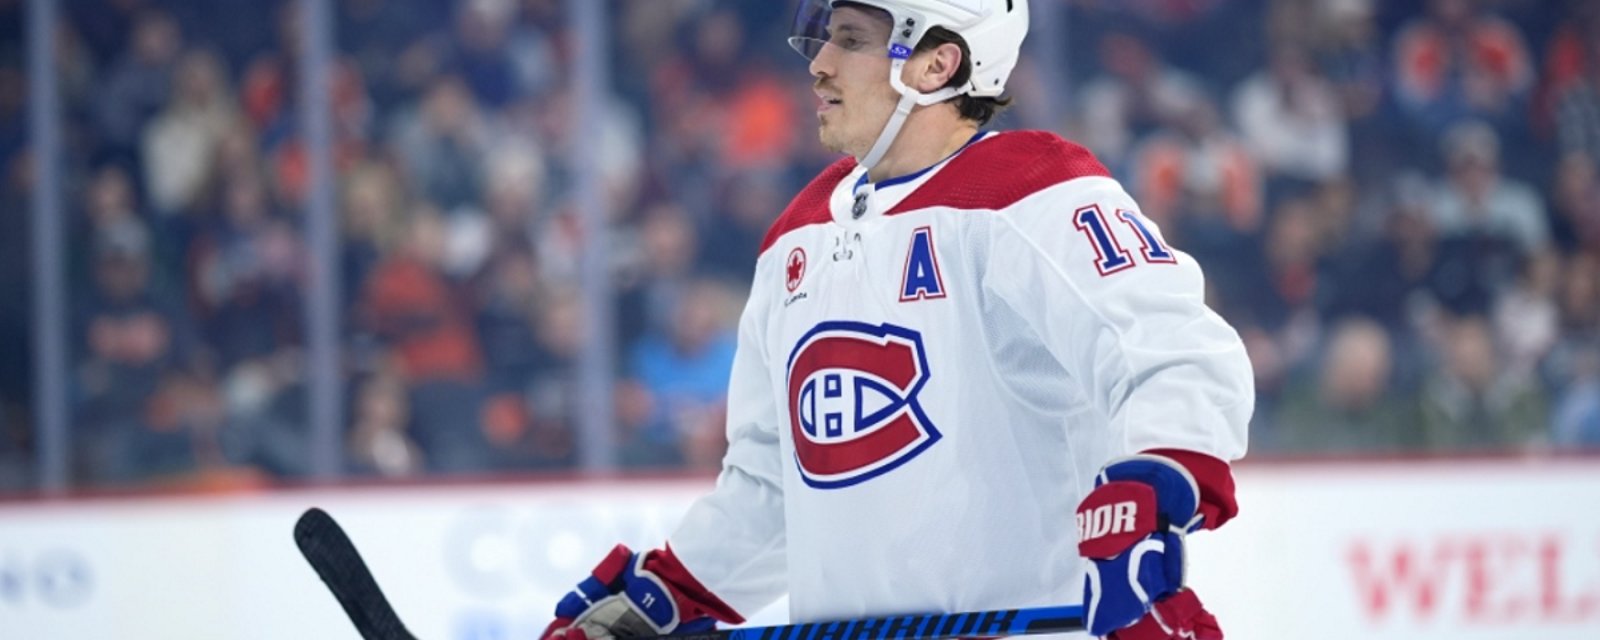 Brendan Gallagher opens up about terrible family tragedy.